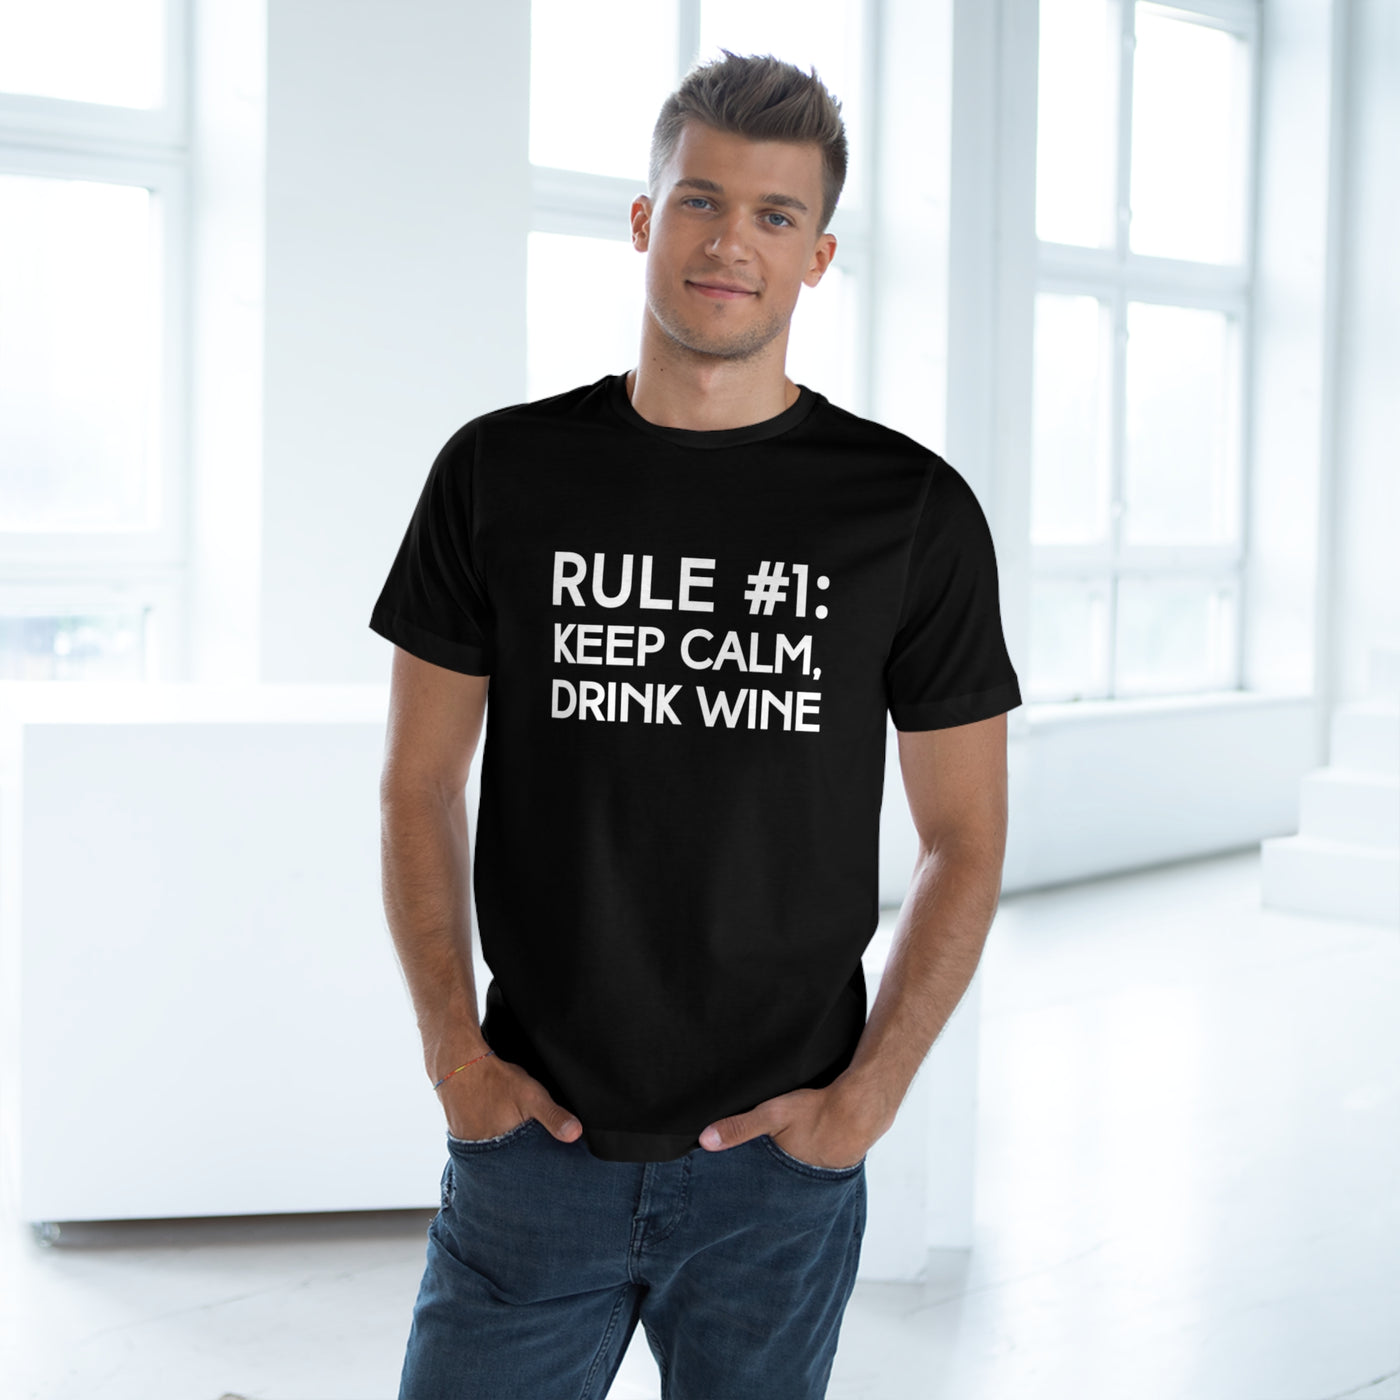 RULE NUMBER 1: KEEP CALM, DRINK WINE Unisex Deluxe T-shirt